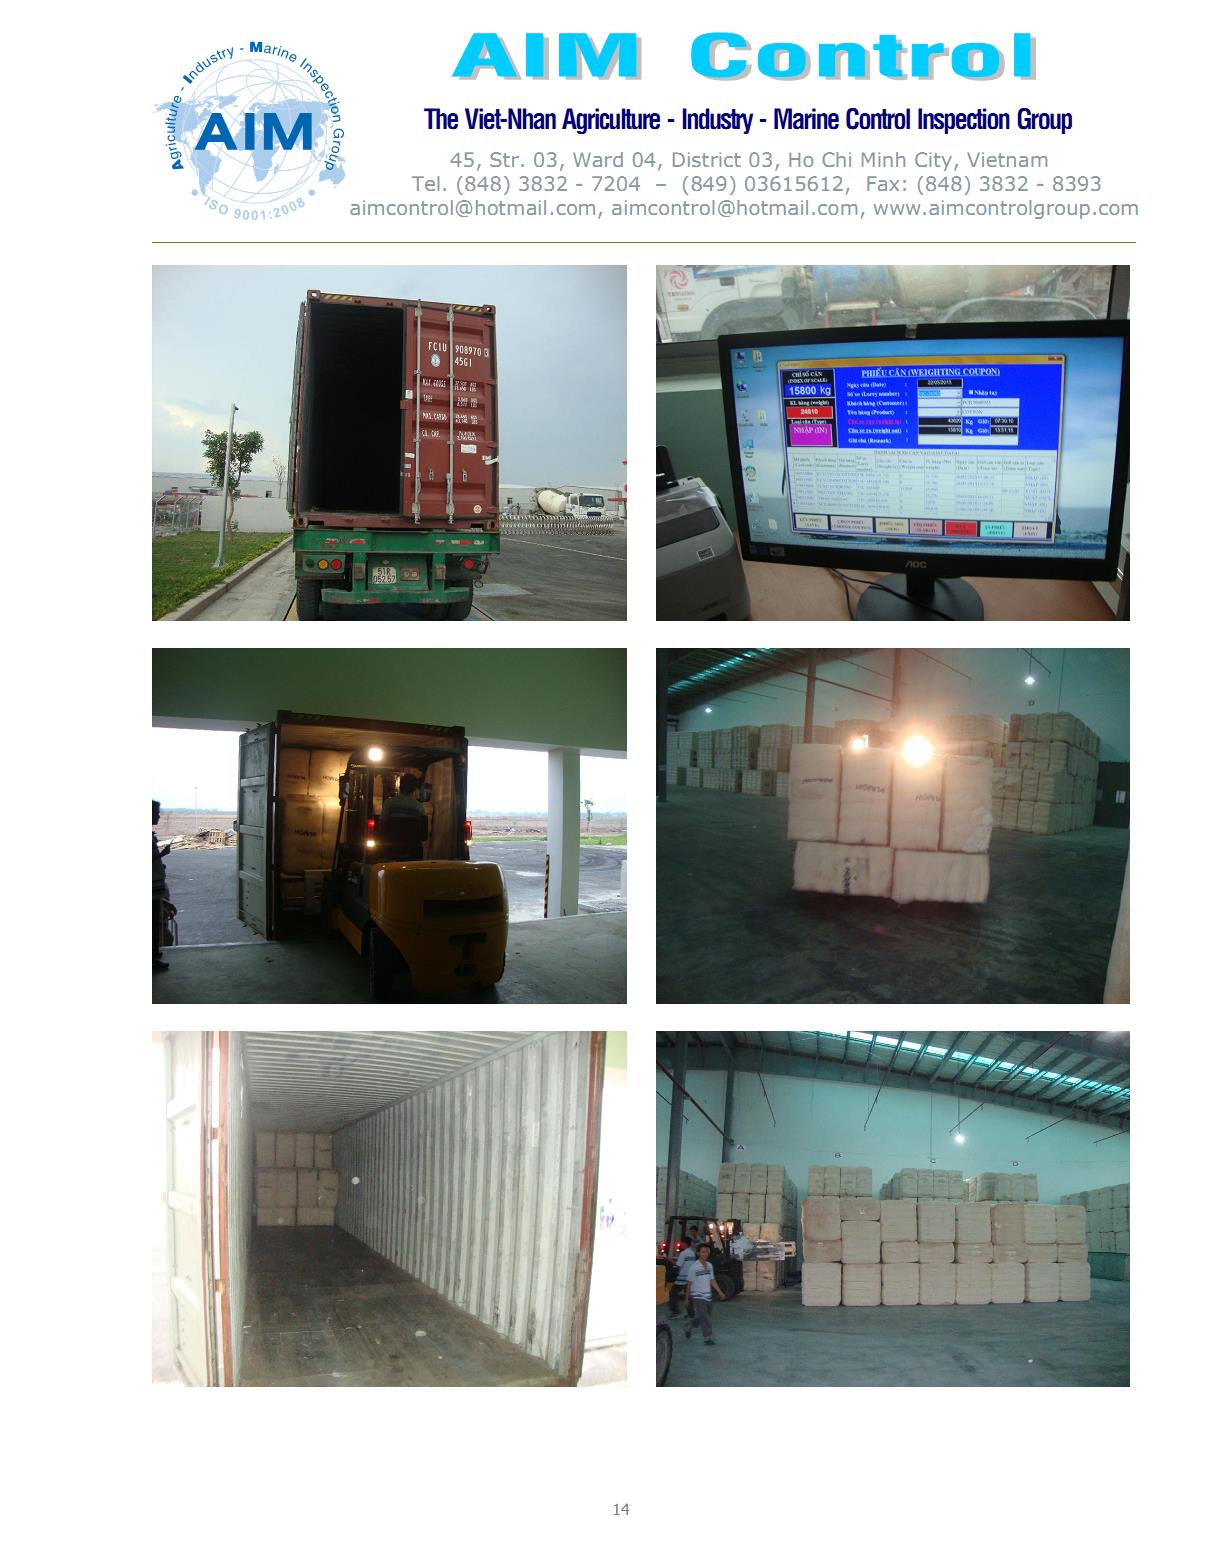 Weight_control_tally_of_cargo_for_container_tallying_men_clerk_Vietnam_Asia_AIM_Control